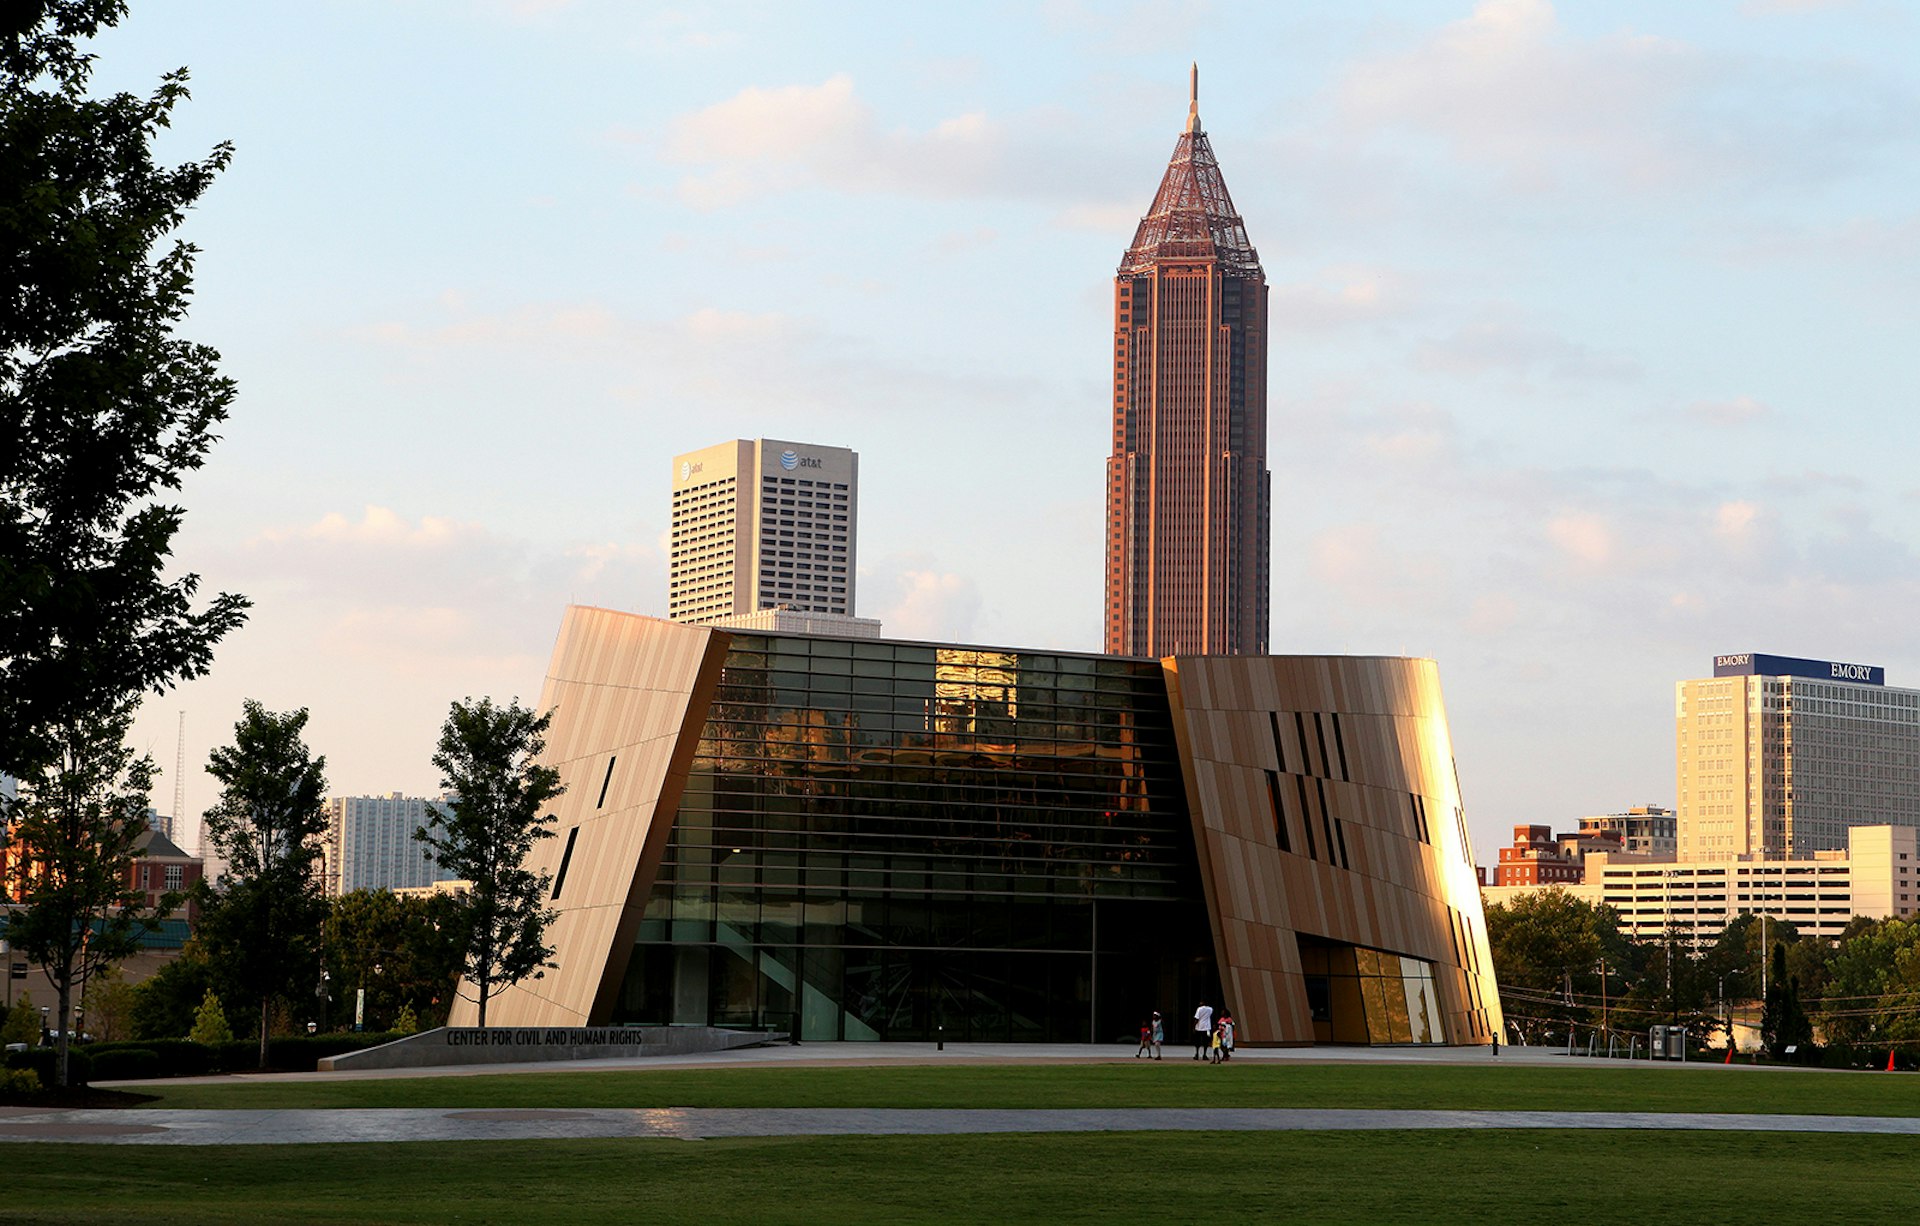 Center for Civil and Human Rights against the Atlanta skyline